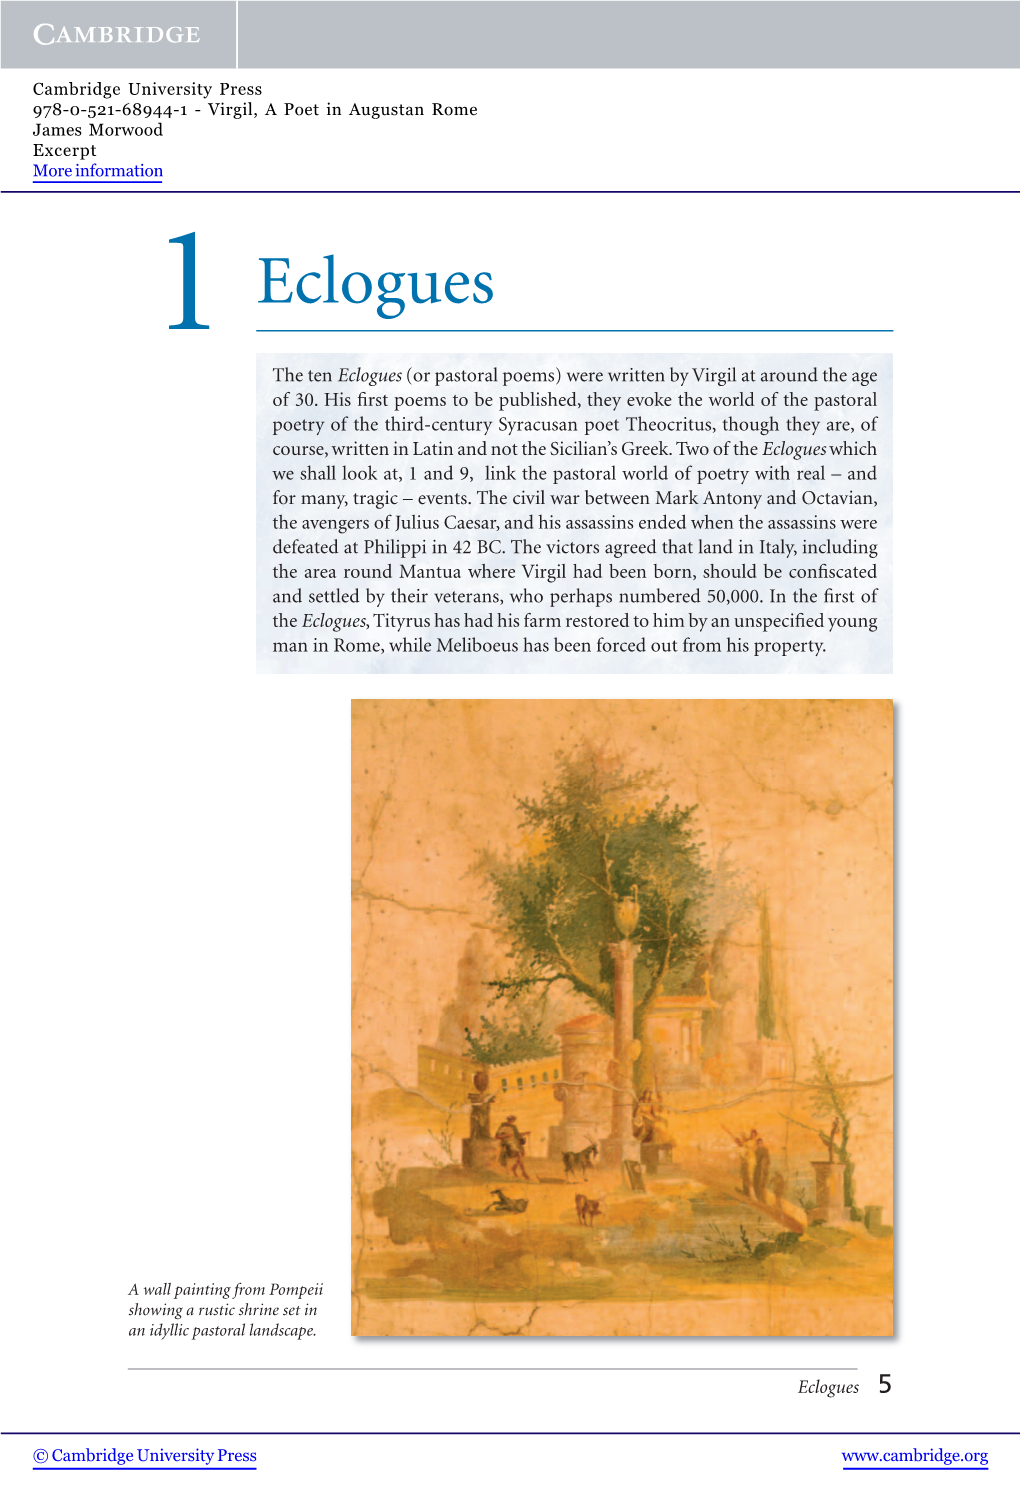 1 Eclogues the Ten Eclogues (Or Pastoral Poems) Were Written by Virgil at Around the Age of 30